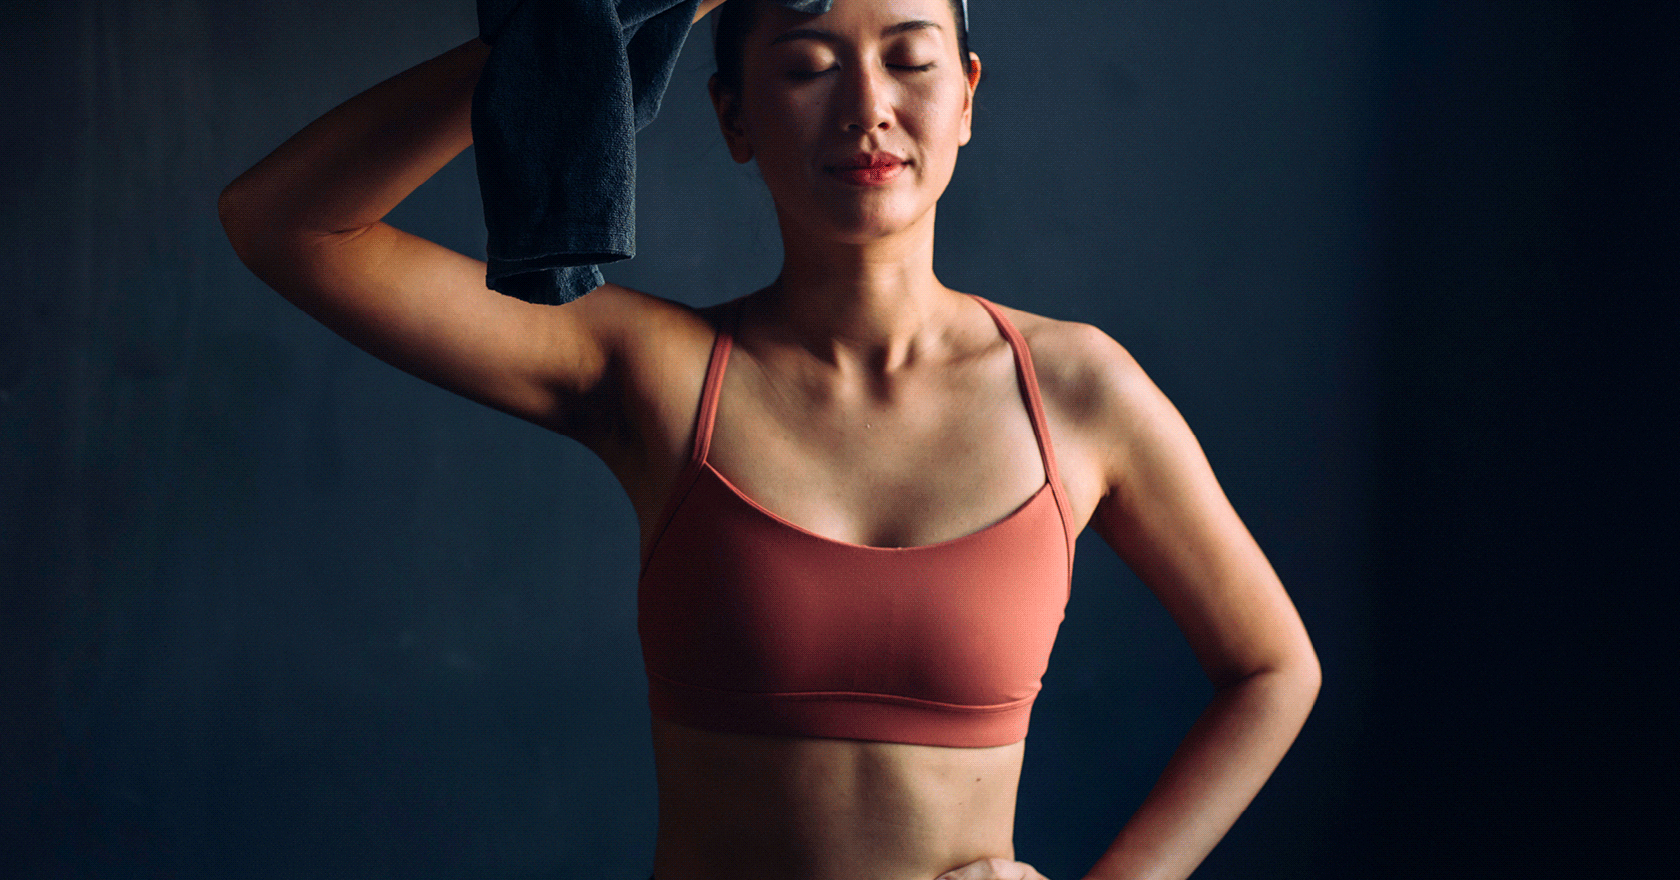 What happens if you don't wear a sports bra when excercising